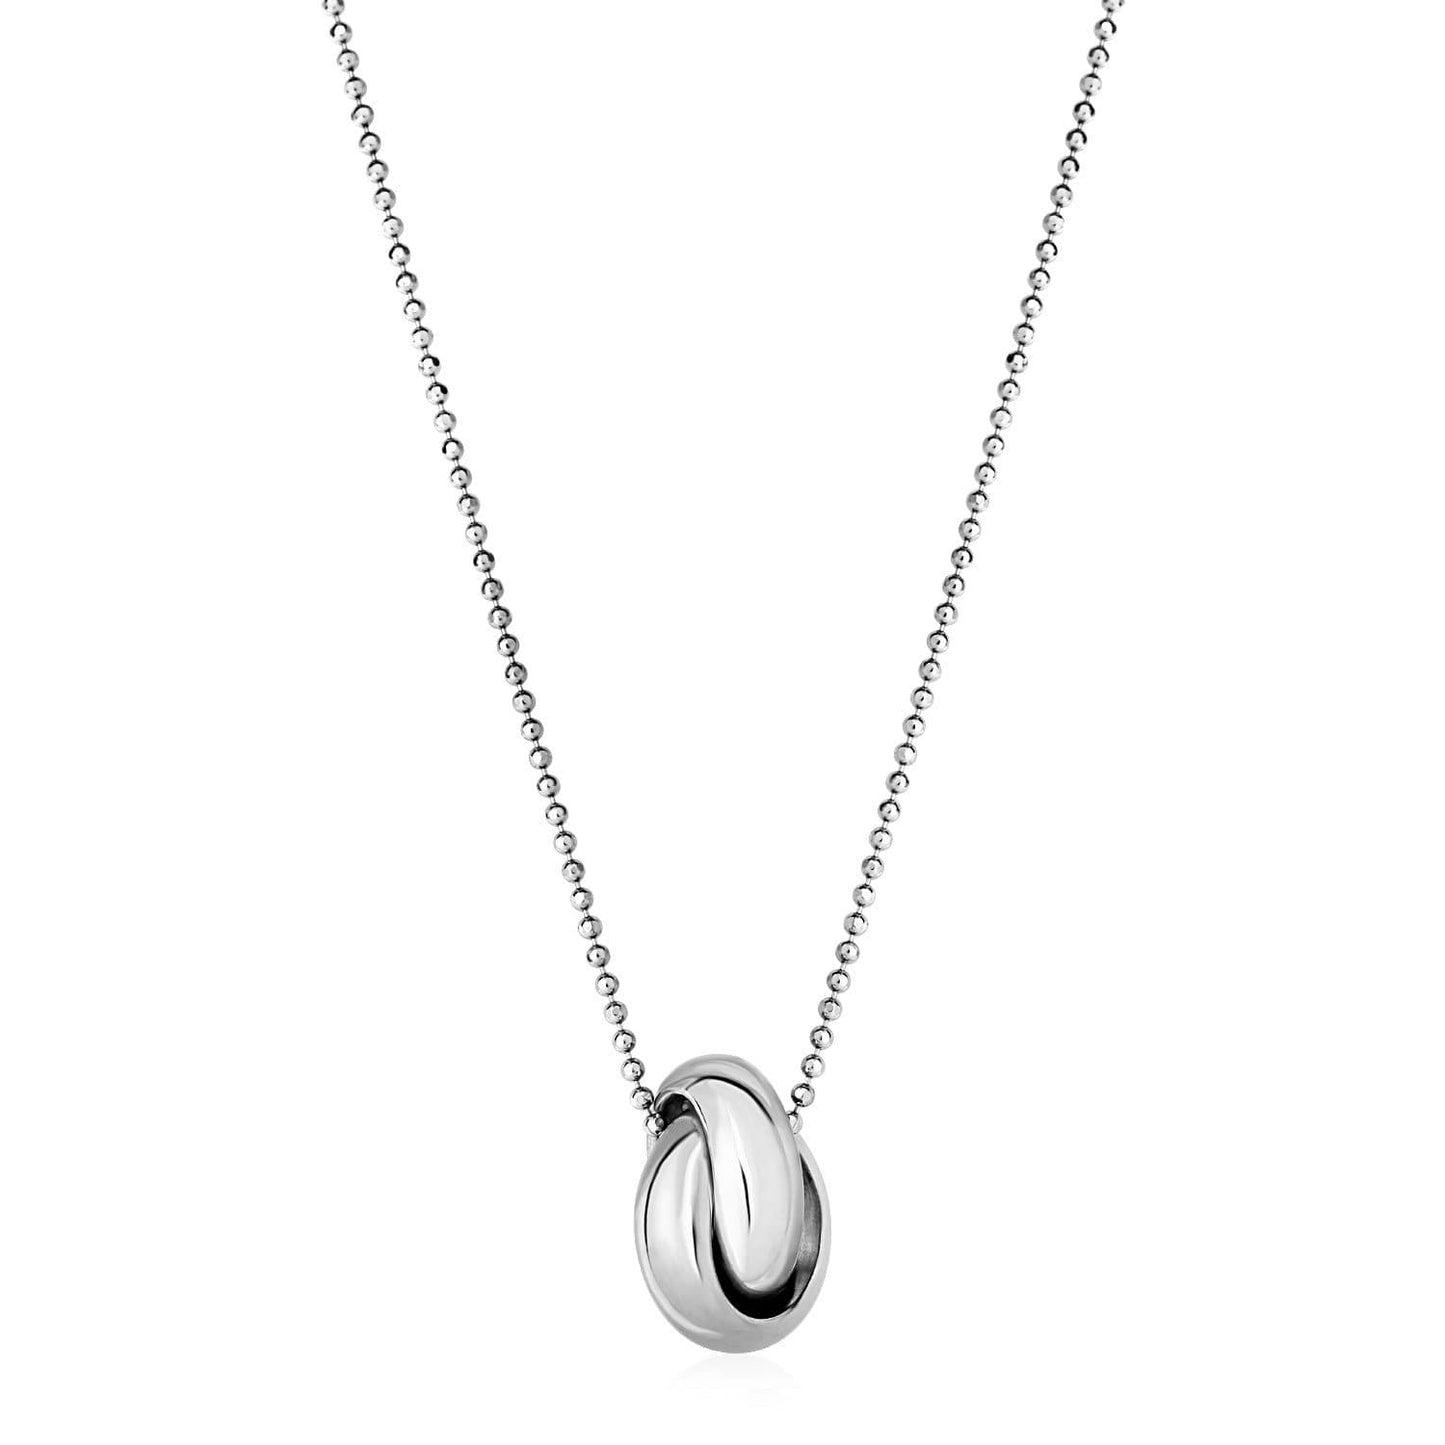 Pendant with Polished Interlocking Ring in Sterling Silver